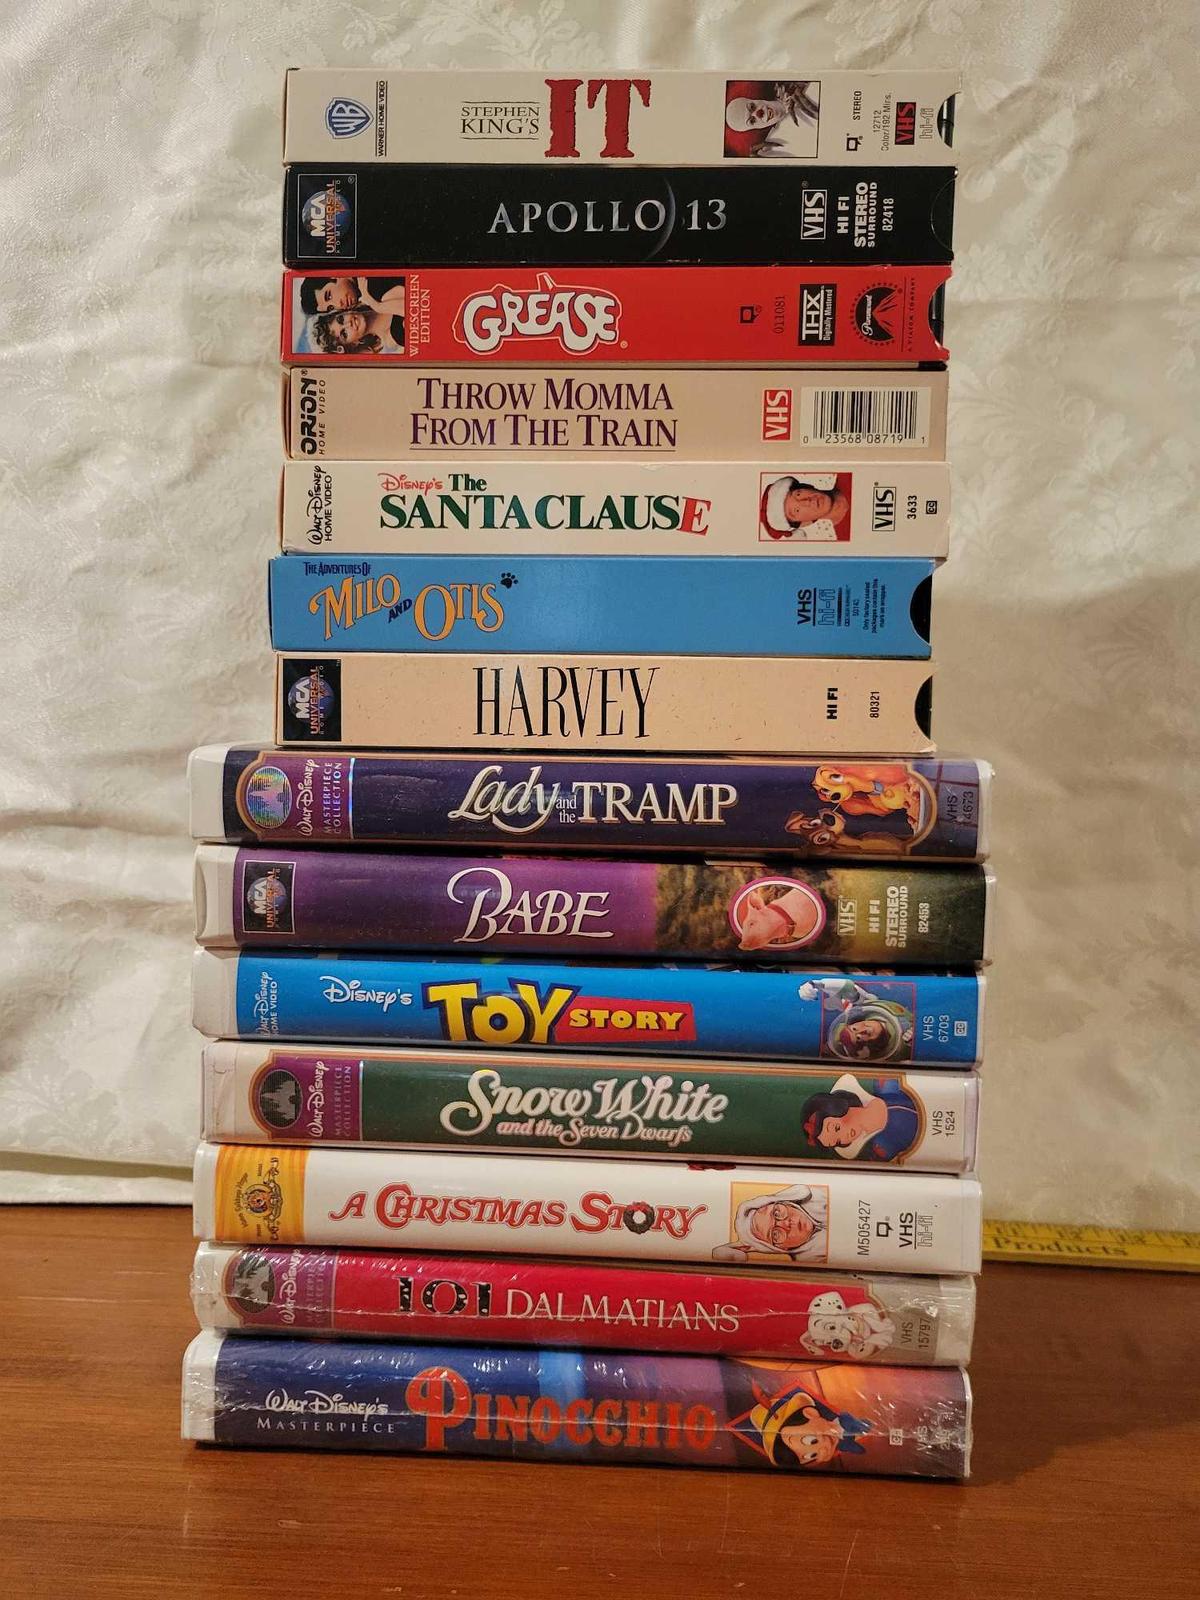 Disney and Various VHS Tapes (14)